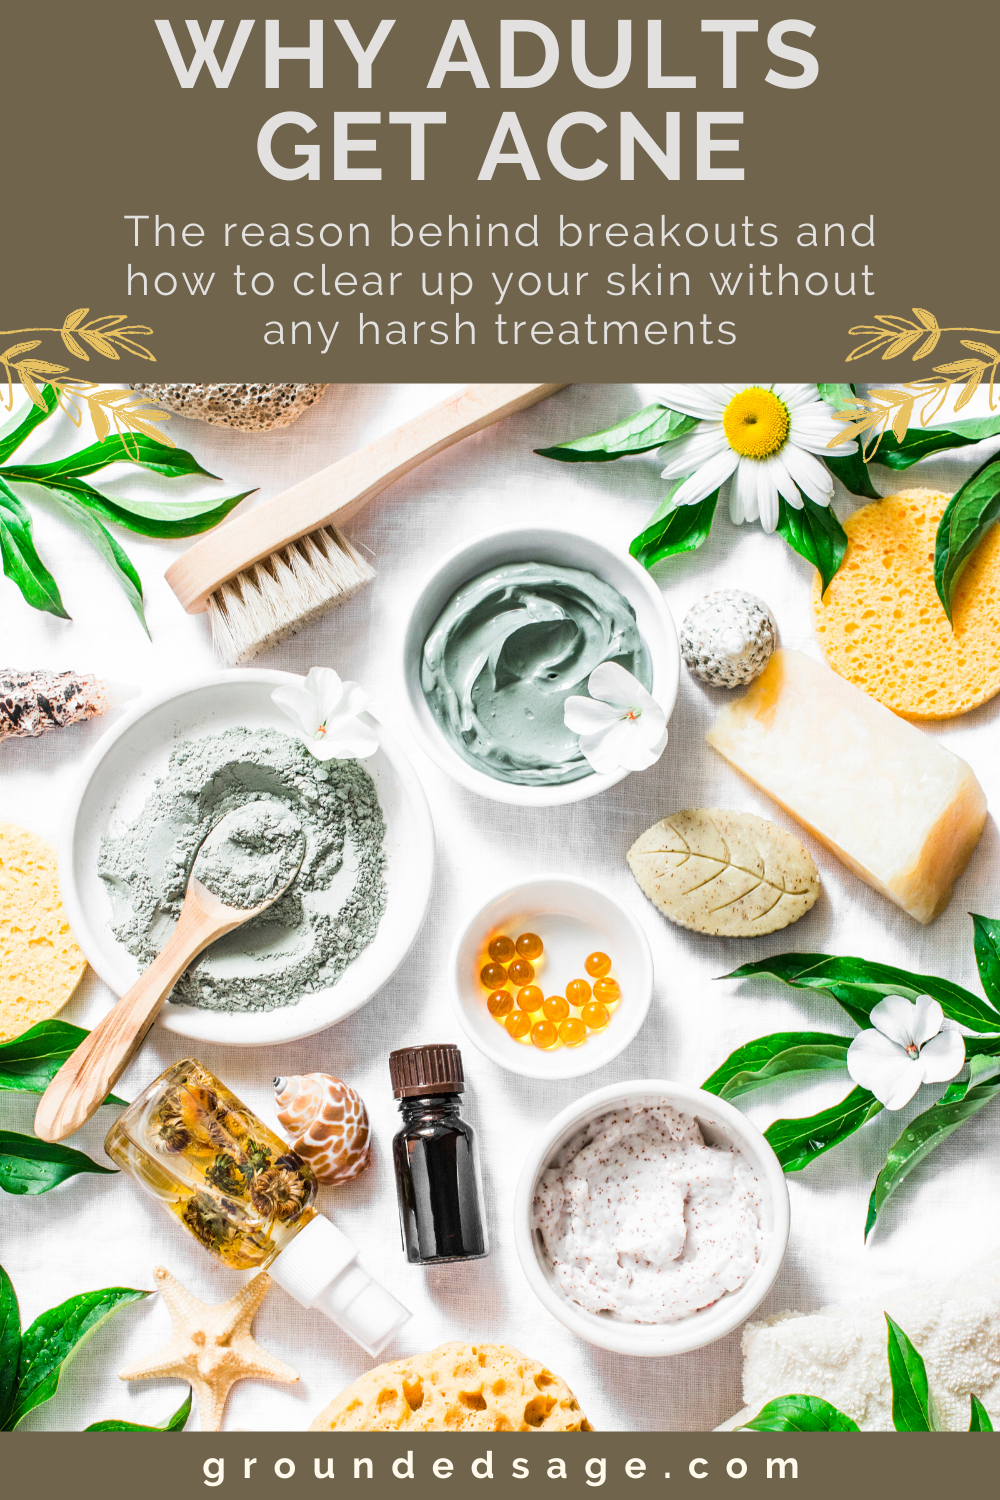 Why it's not just teenagers who breakout. Adult acne happens because of damage to our skin's oils (sebum). Find out how the damage happens that sparks breakouts and what to do about it to clear up acne spots without any harsh treatments